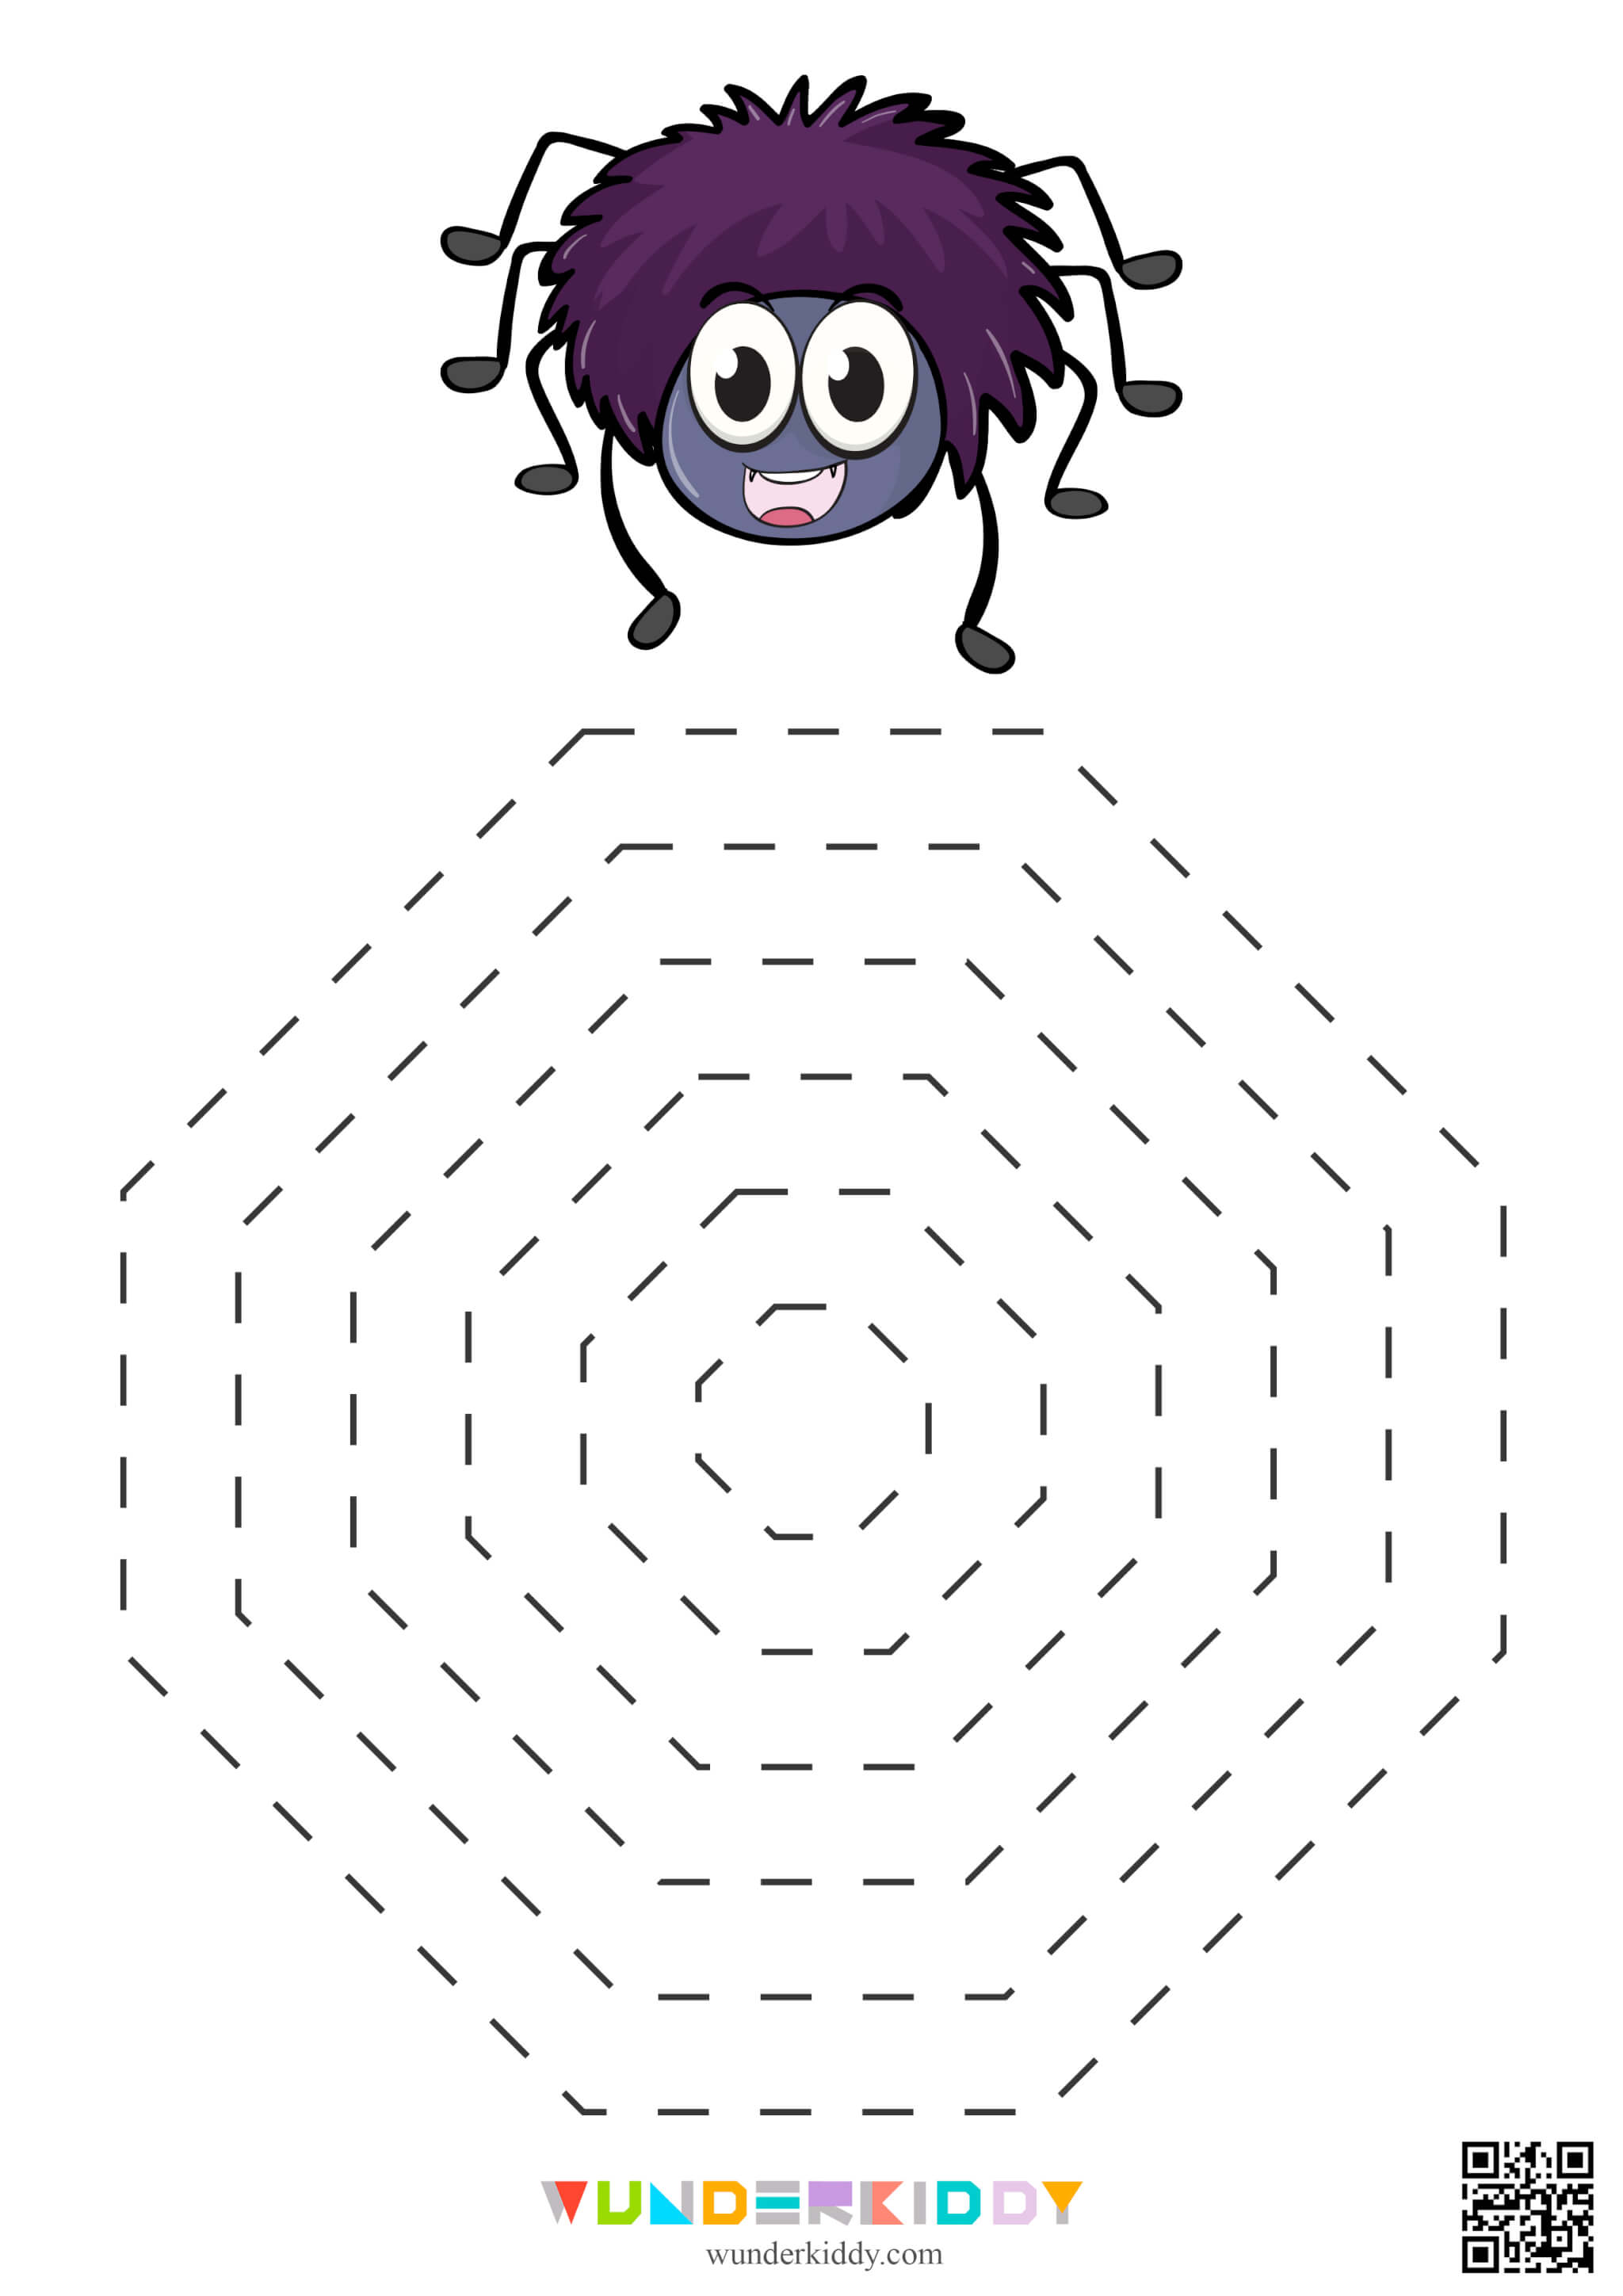 Easy Tracing Worksheets Spiders and Cobwebs - Image 2